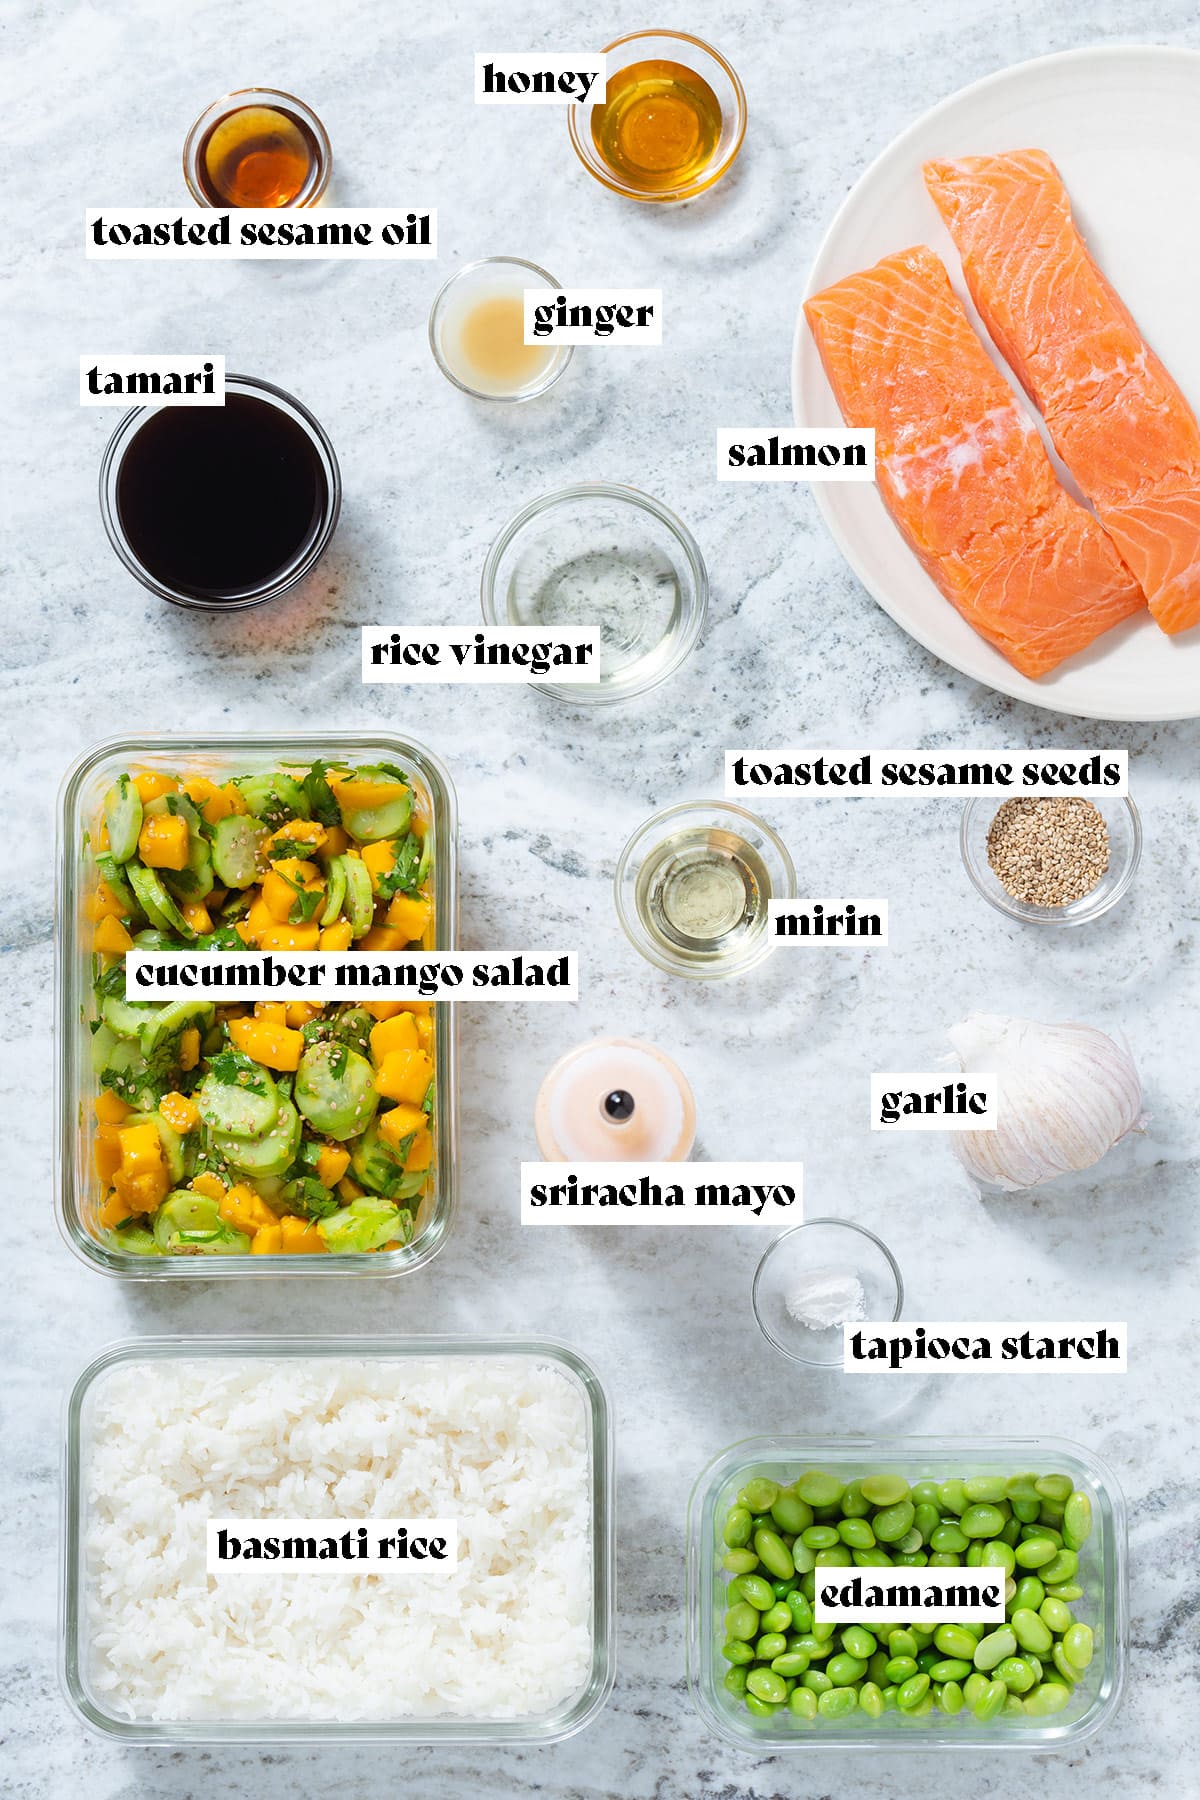 Ingredients like raw salmon, mango salad, rice, edamame, and spices laid out on a grey background.